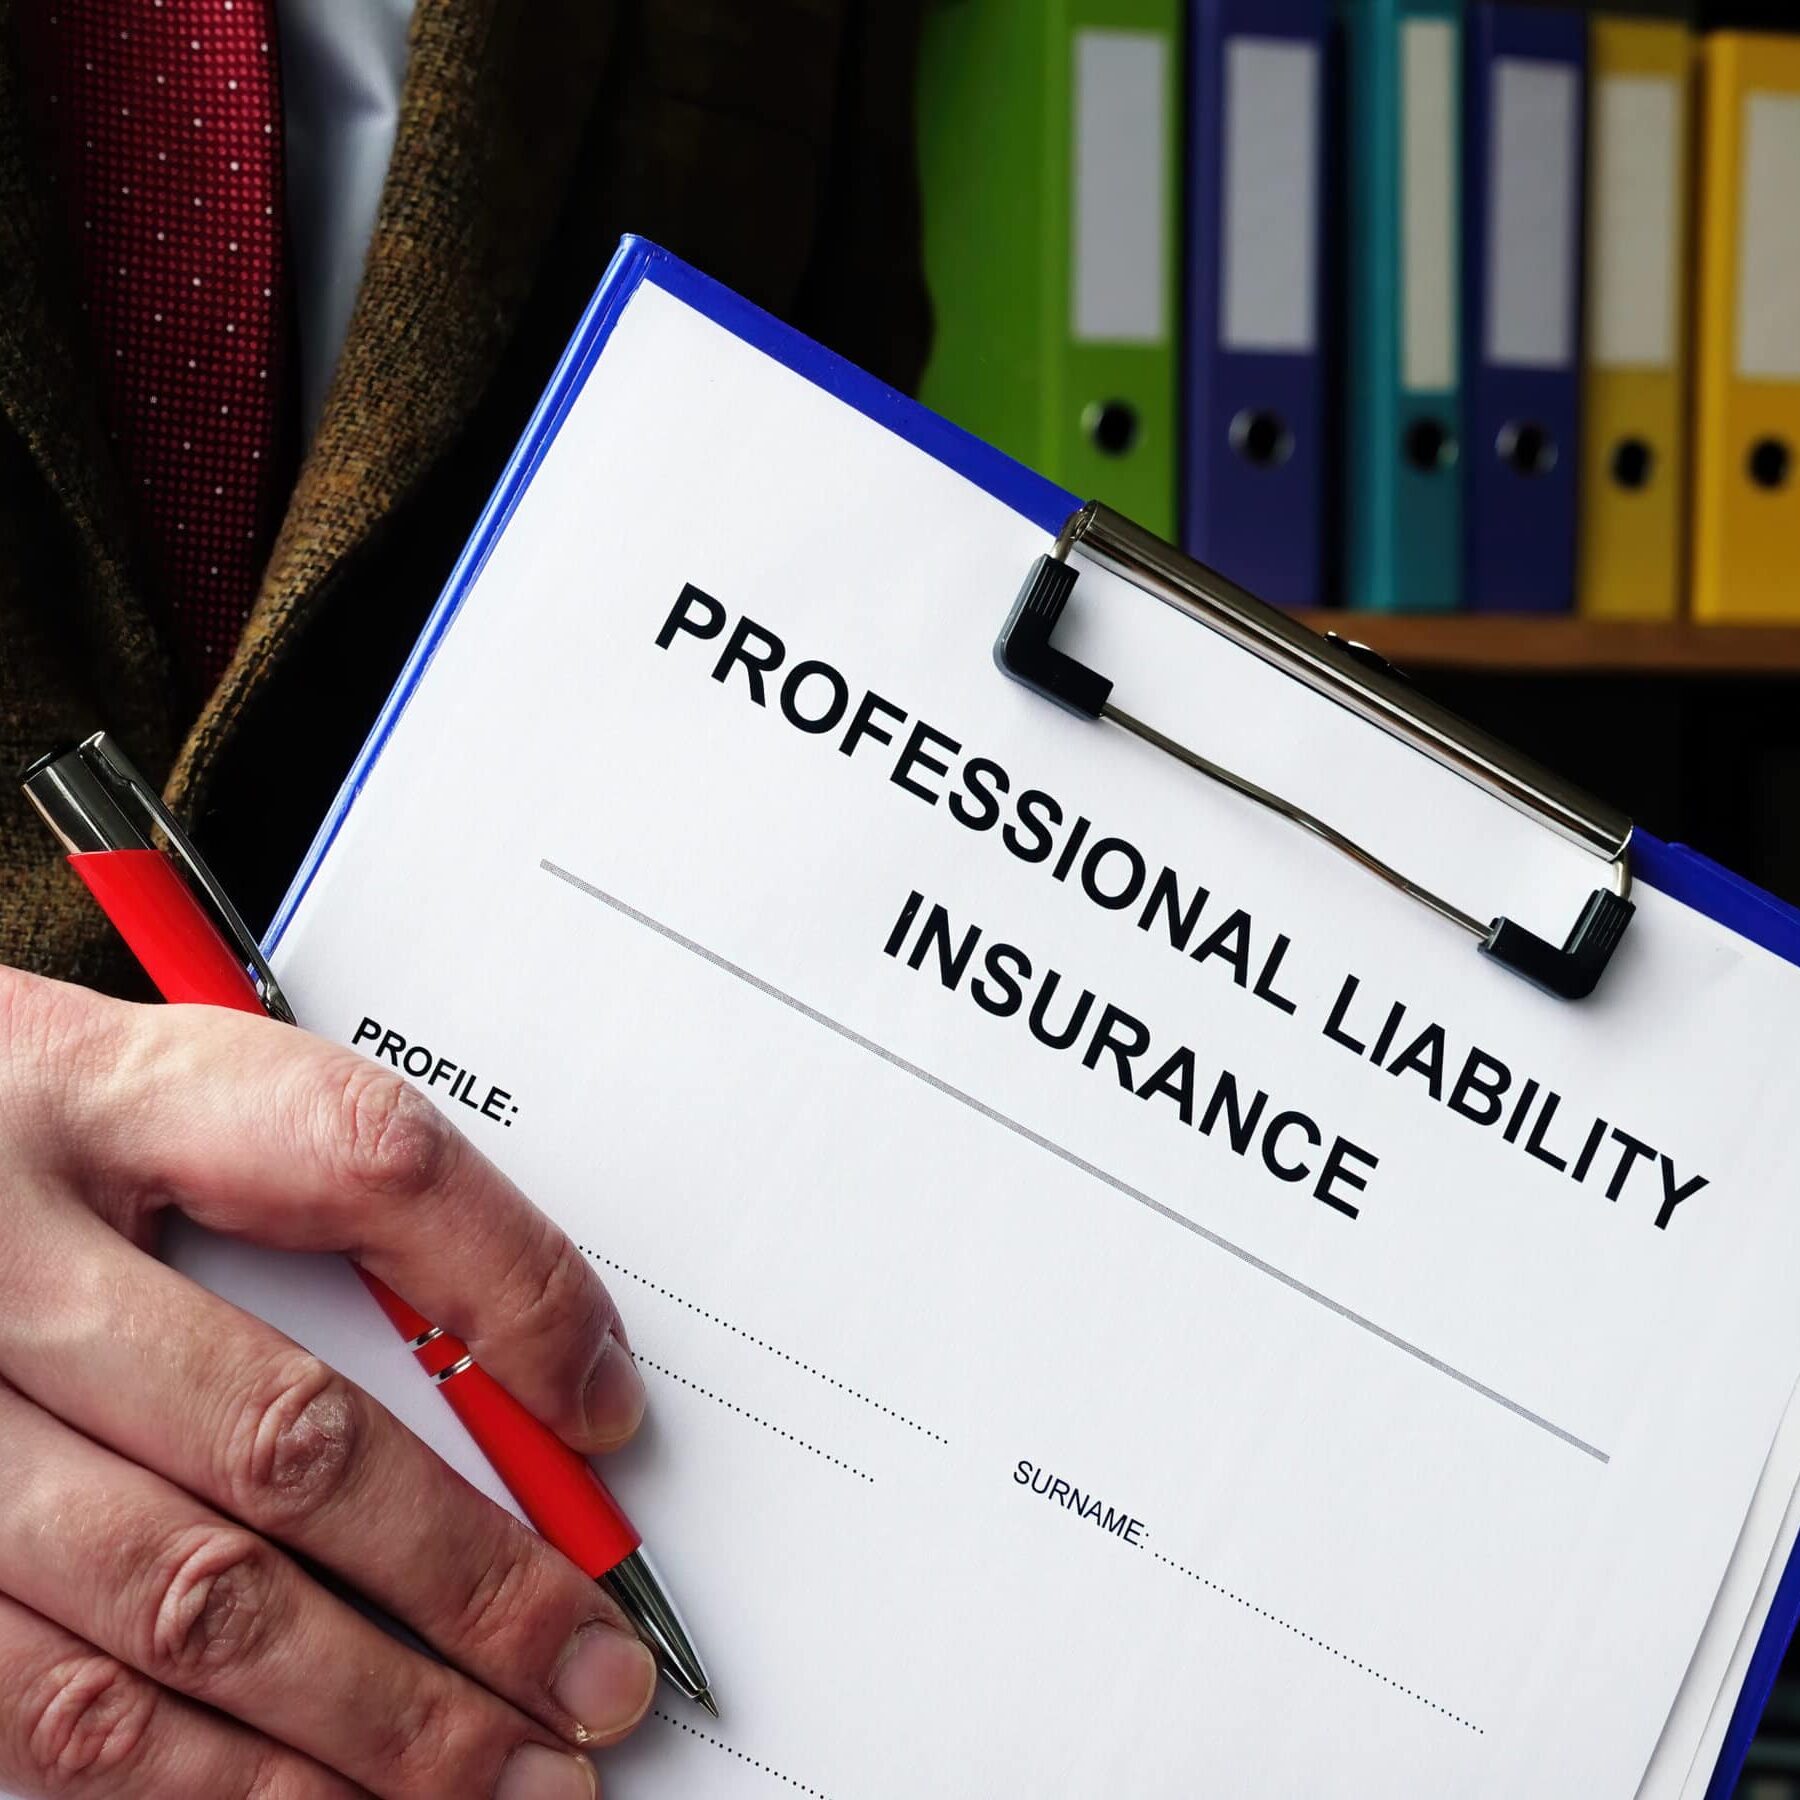 PLI professional liability insurance empty form ready for signing.